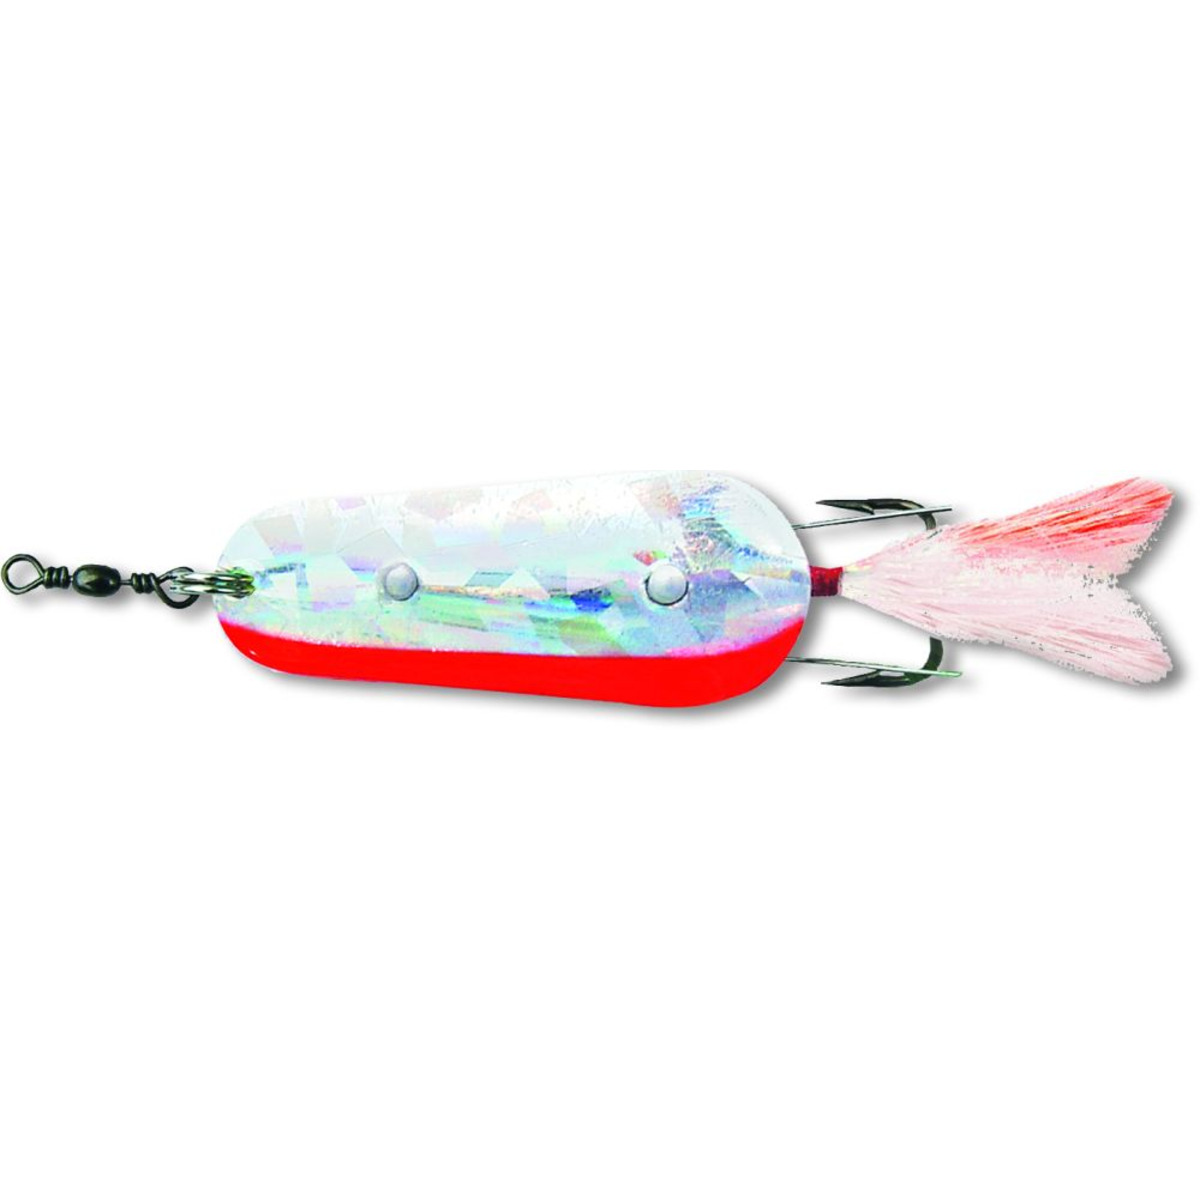 Zebco Weedy - 16 g - silver/red